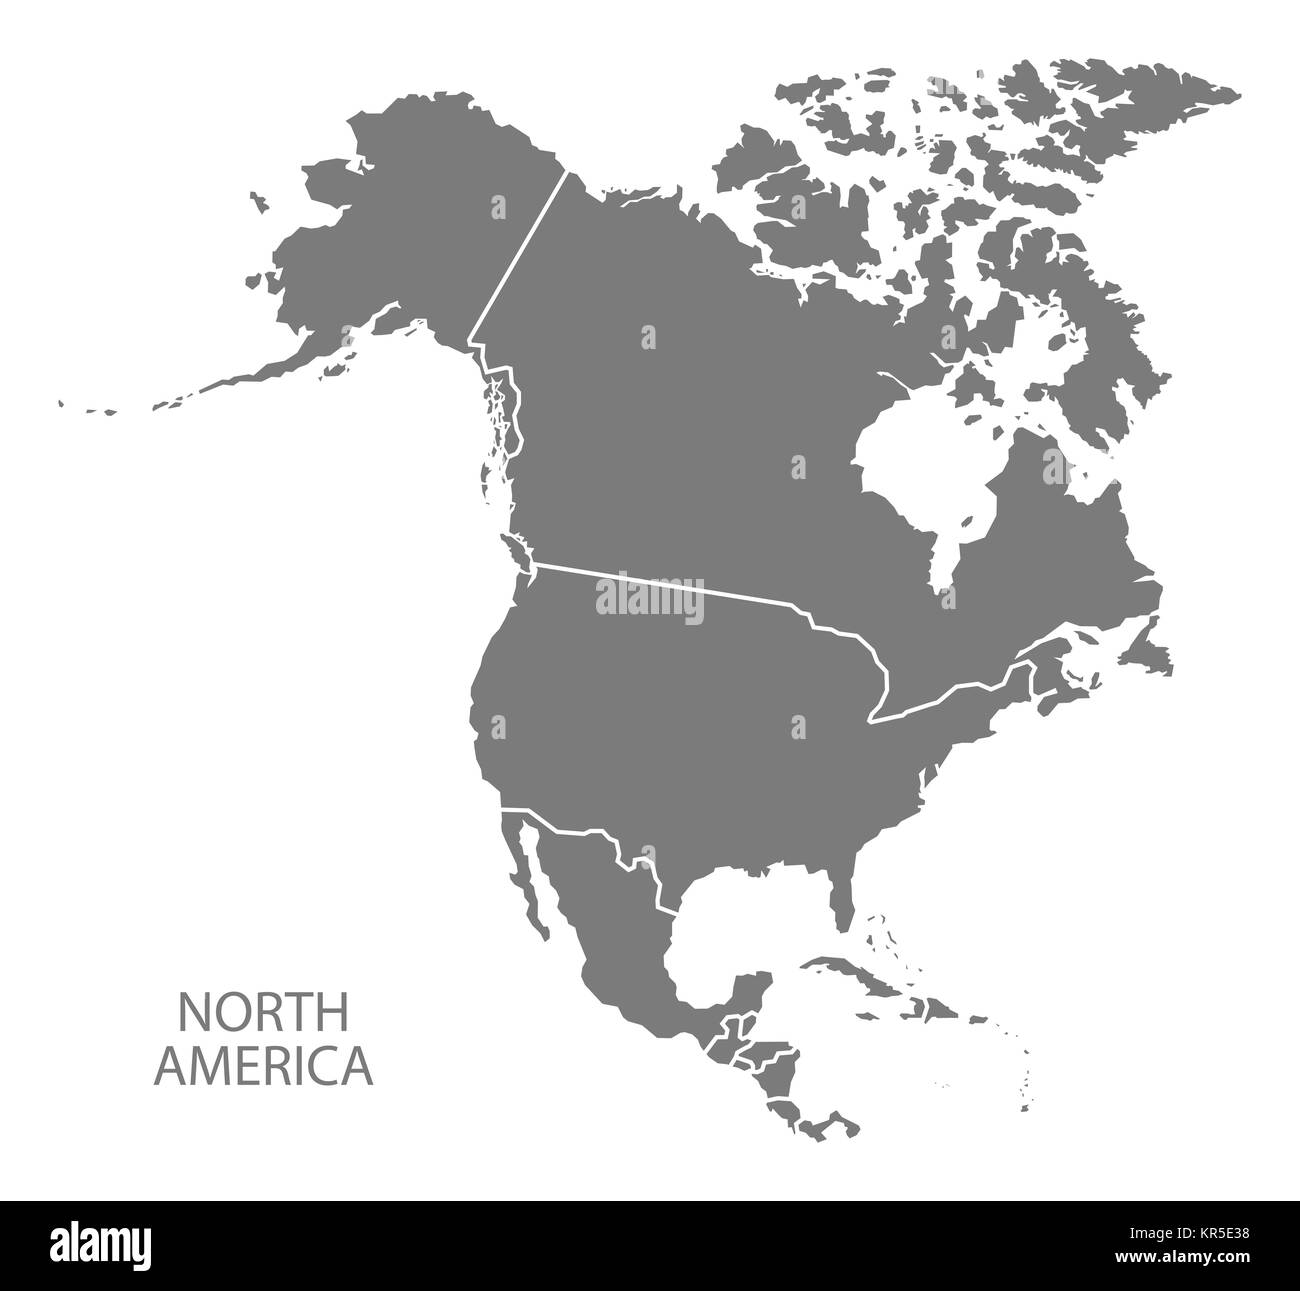 North America Map Cut Out Stock Images And Pictures Alamy 